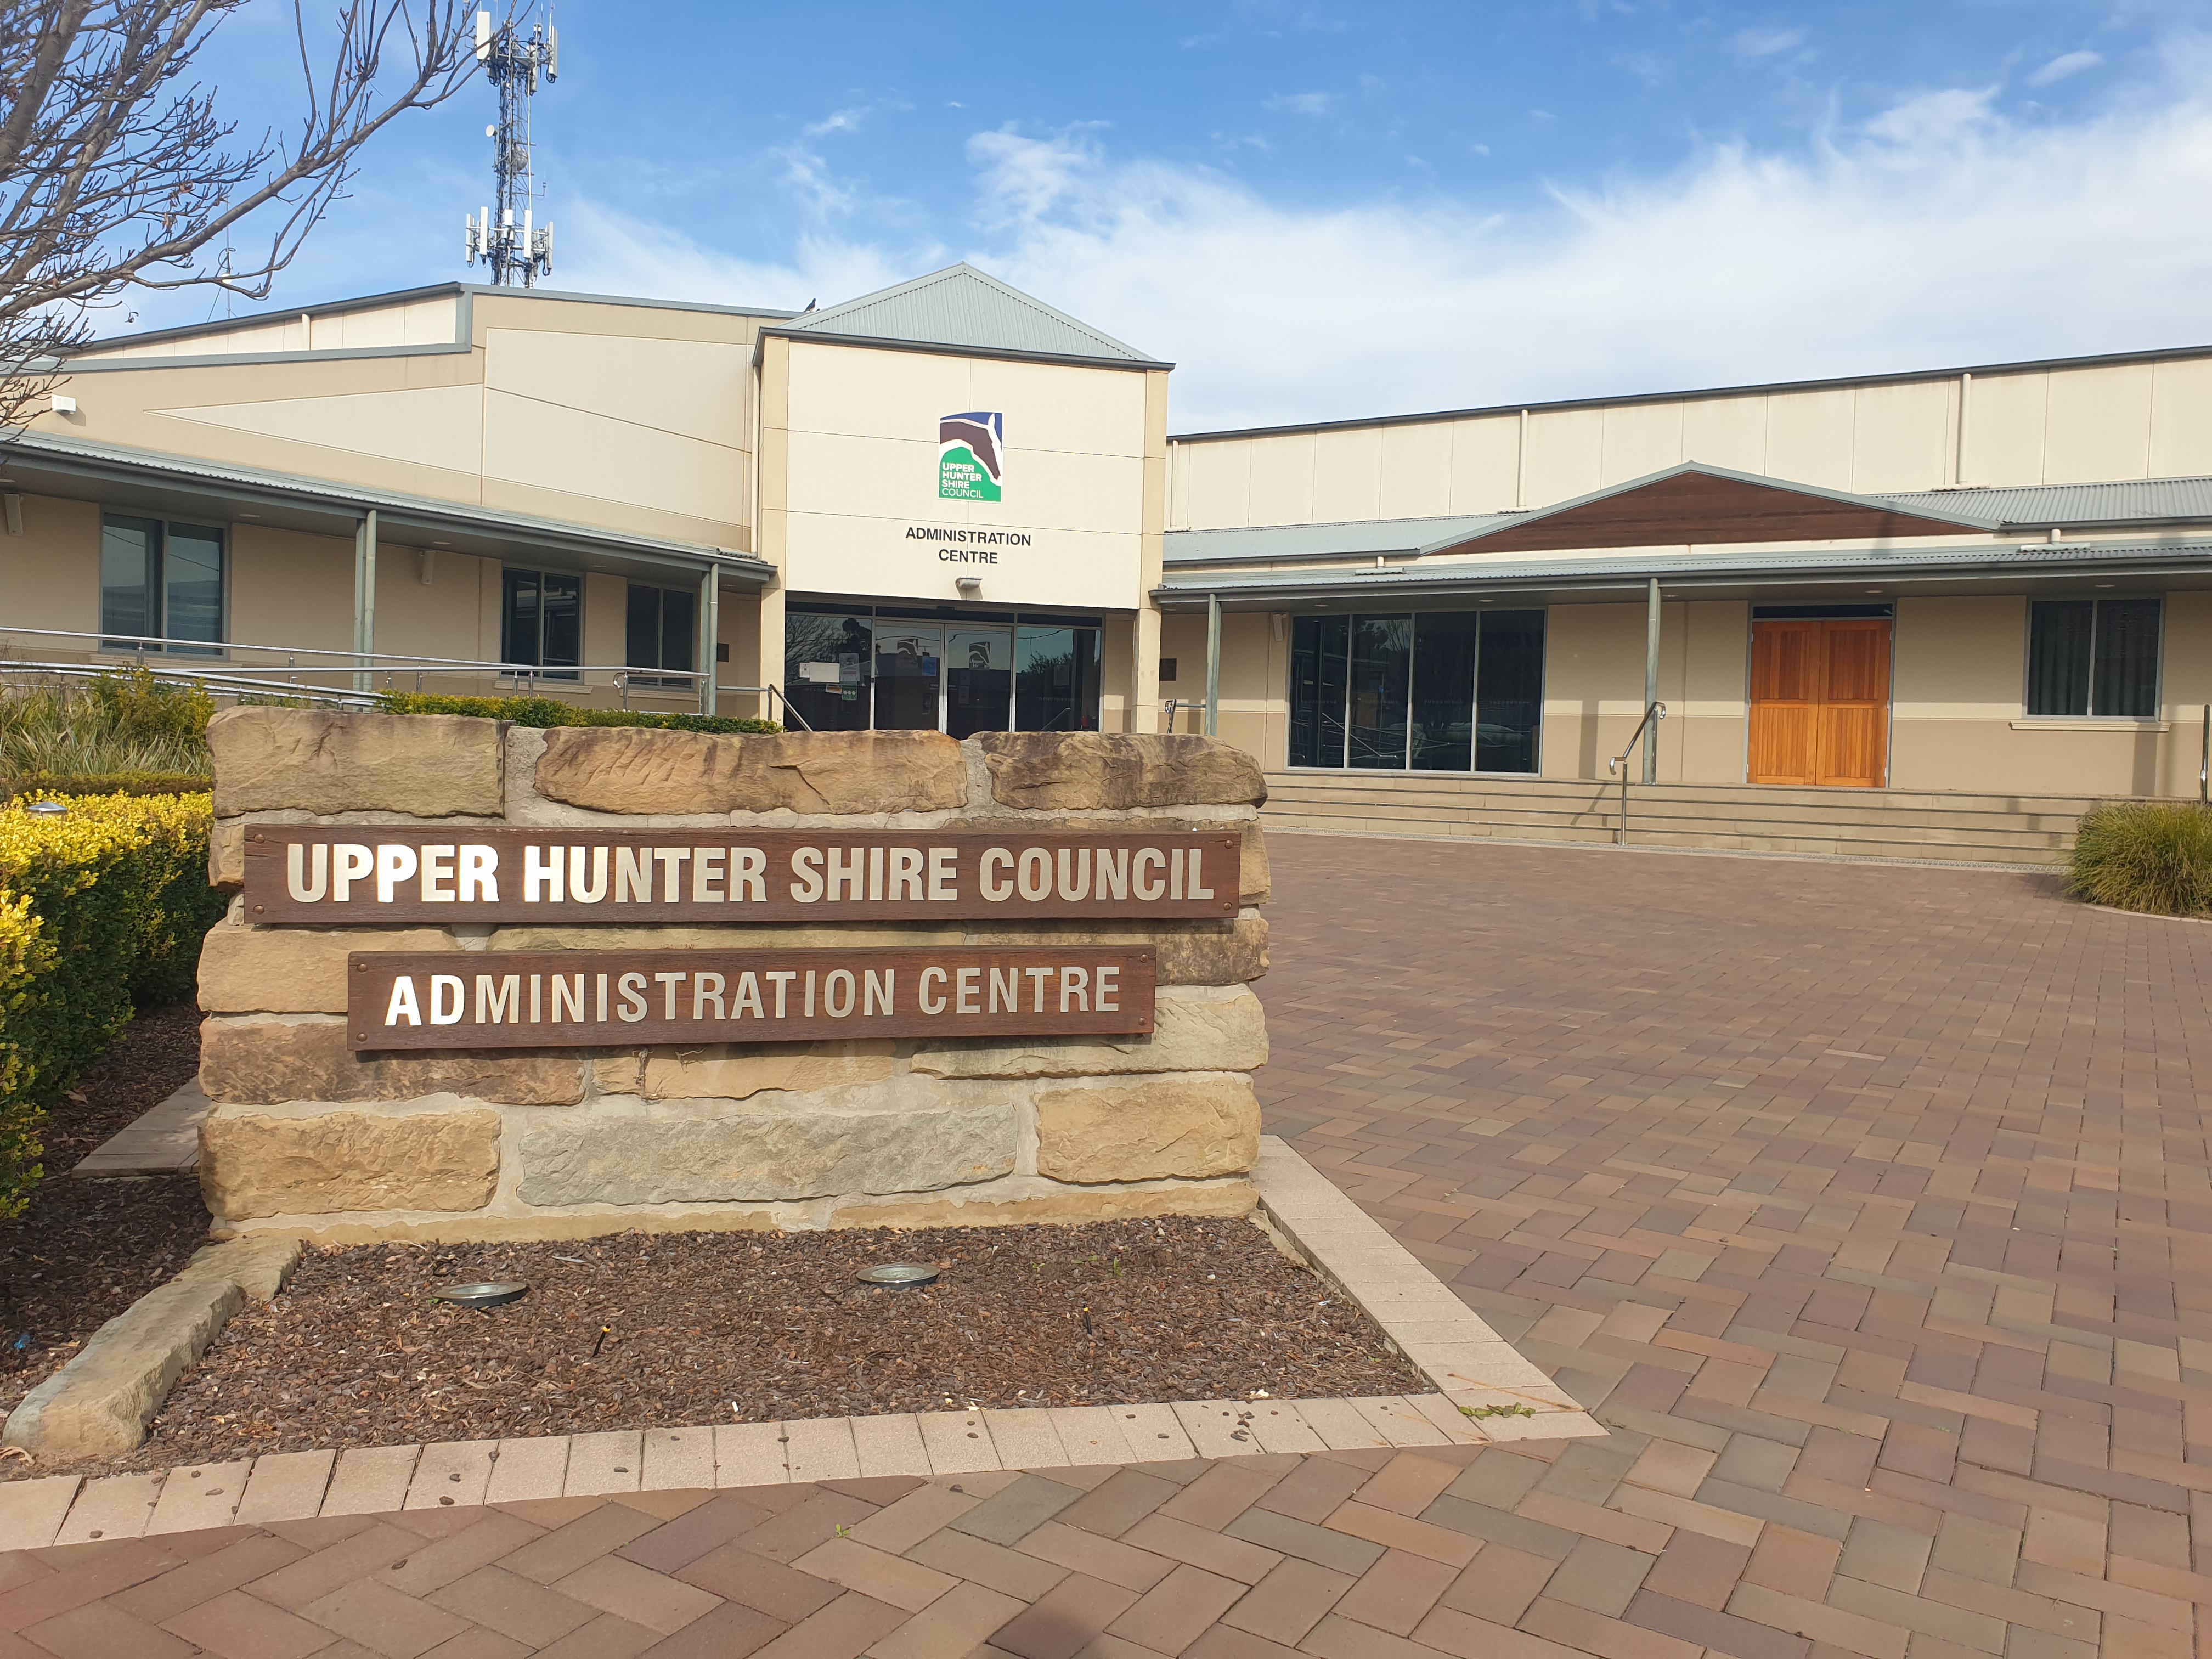 Election Results in for Upper Hunter